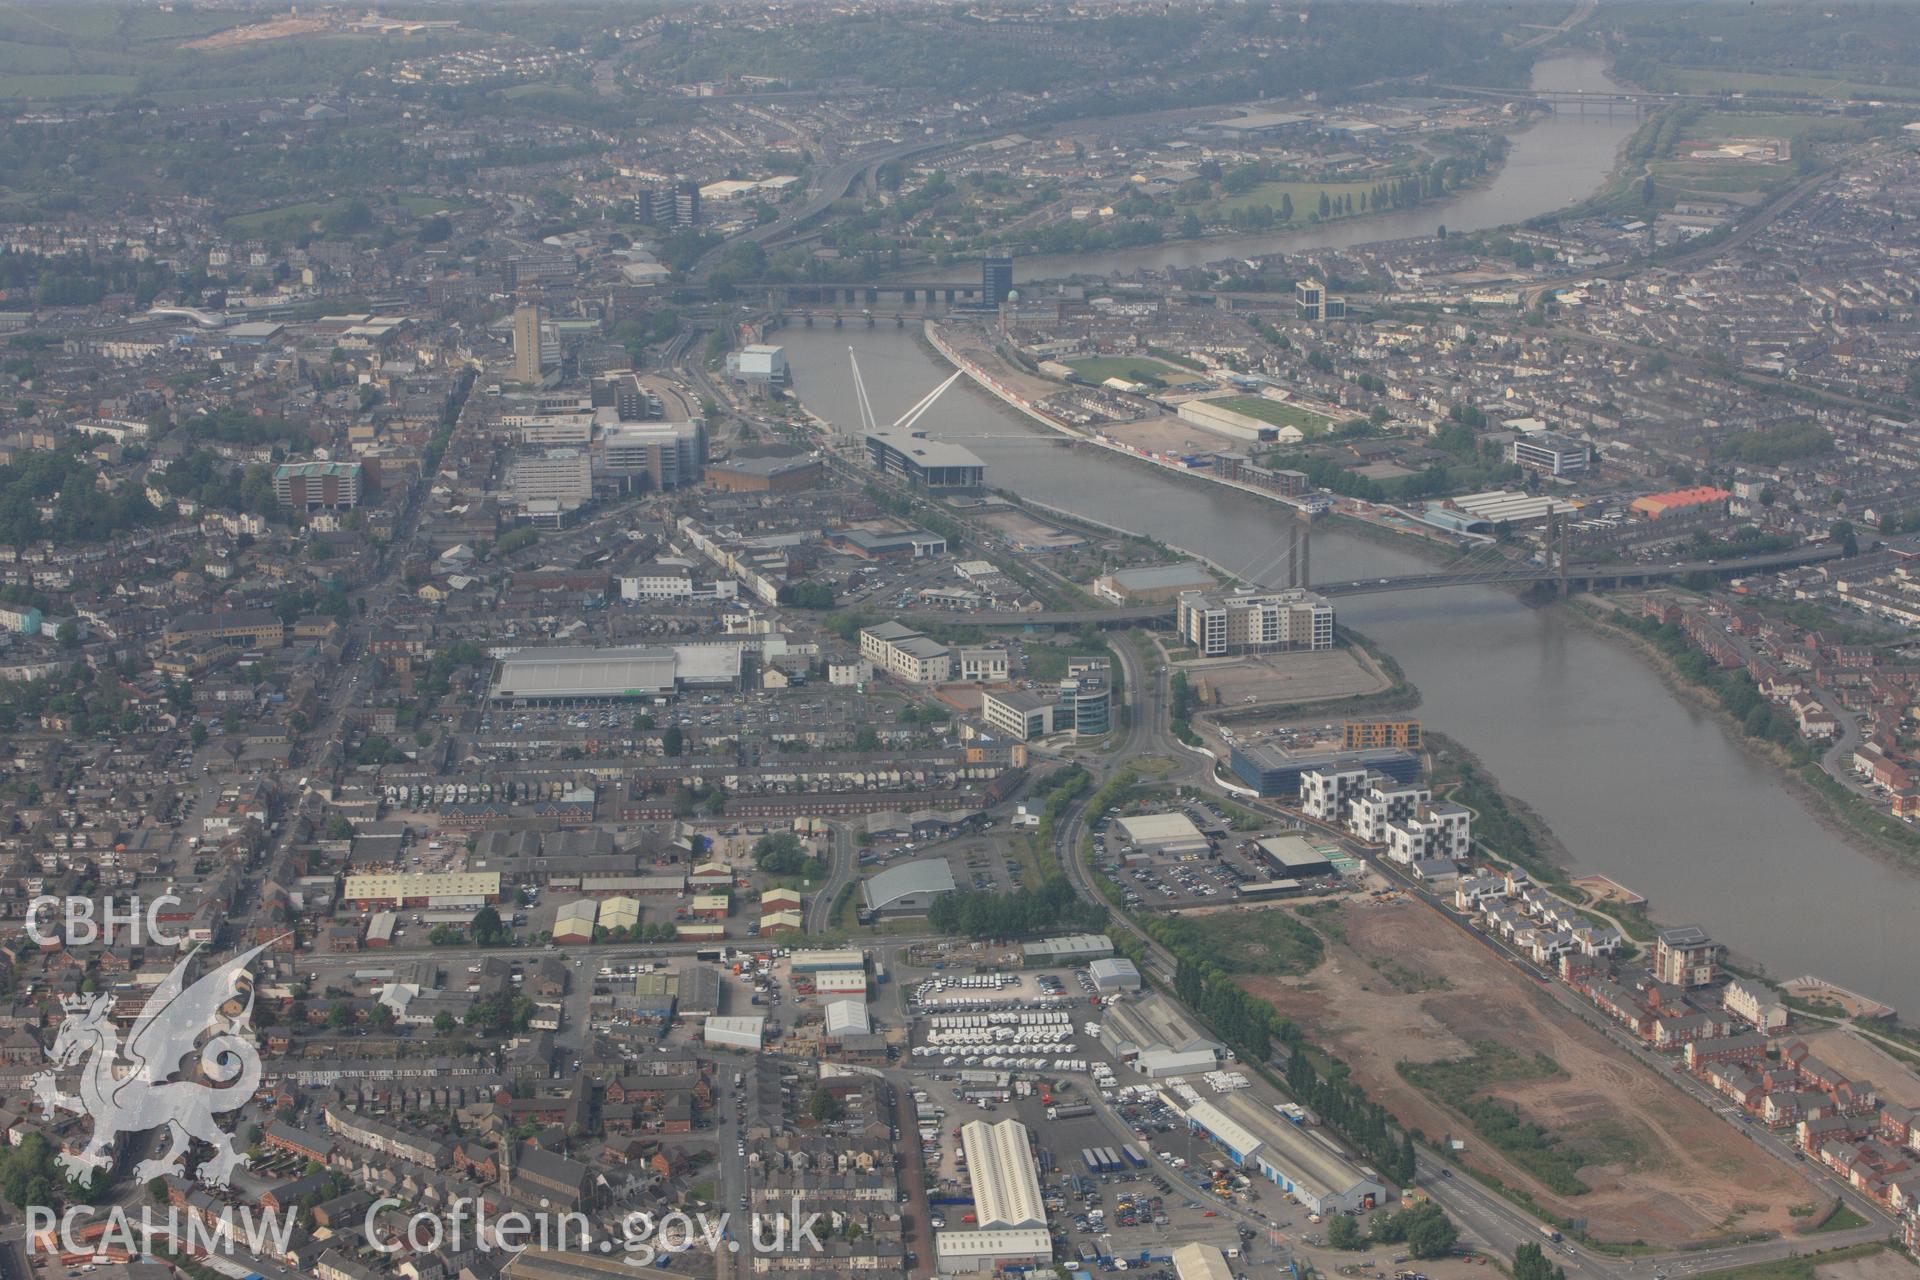 RCAHMW colour oblique photograph of Newport, view from south. Taken by Toby Driver on 26/04/2011.